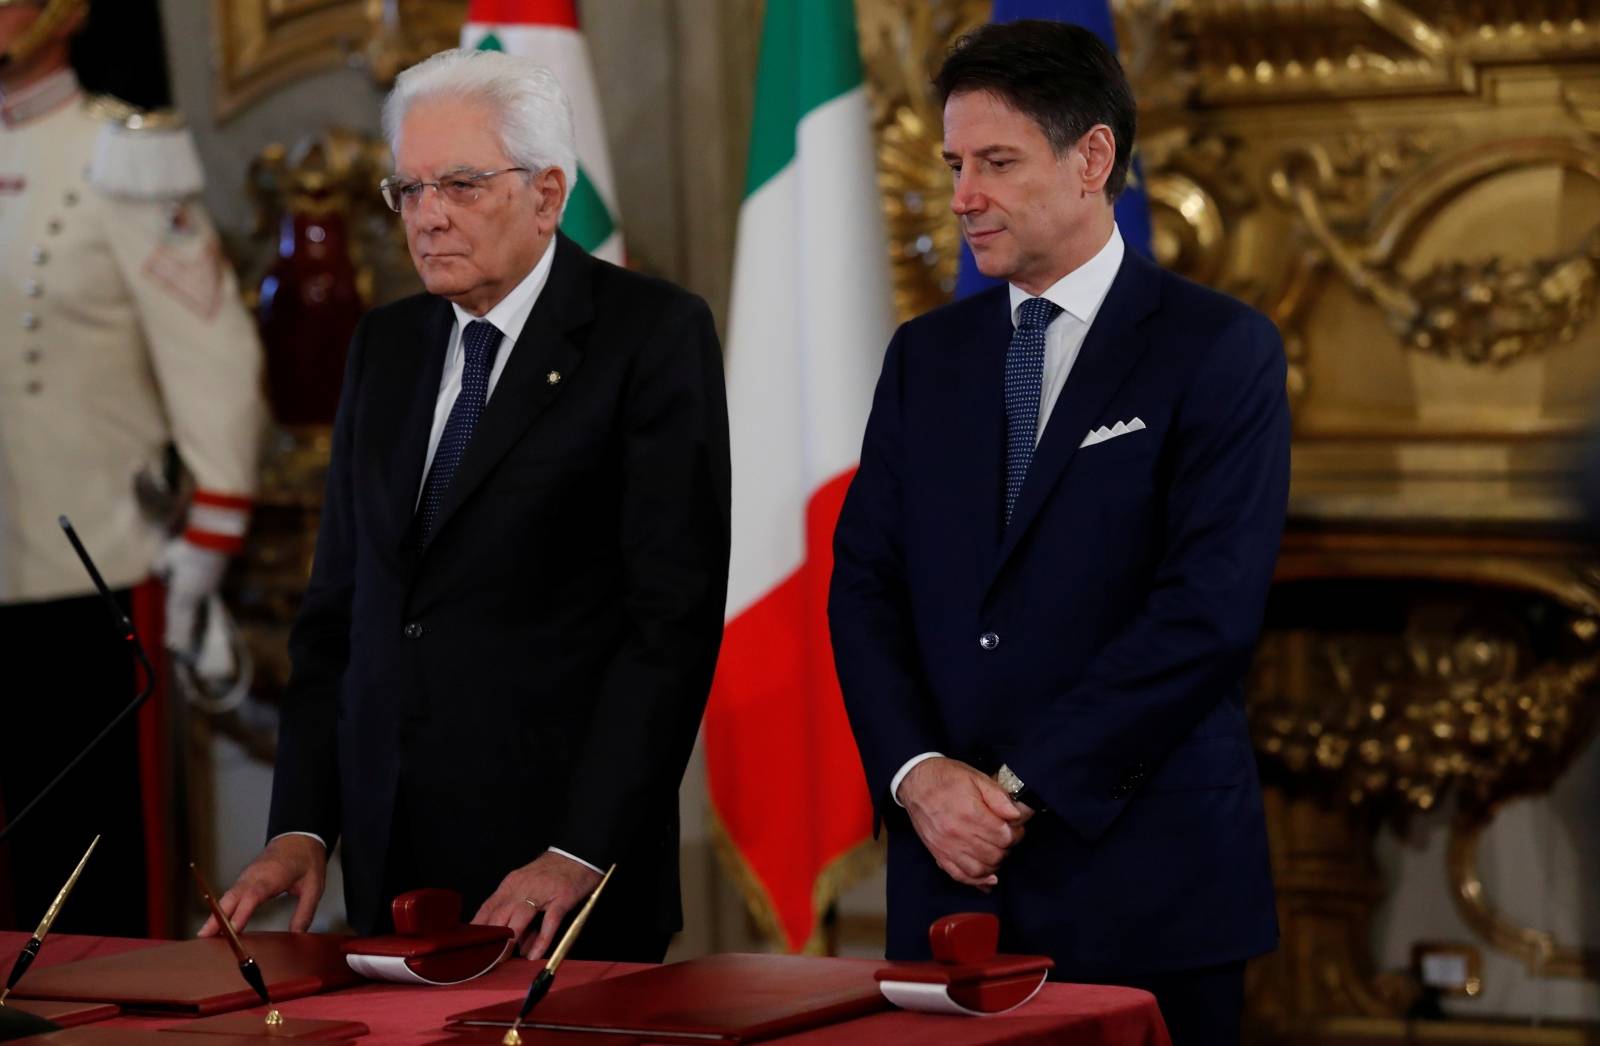 The new Italian government led by Prime Minister Giuseppe Conte, is sworn in at the presidential palace in Rome